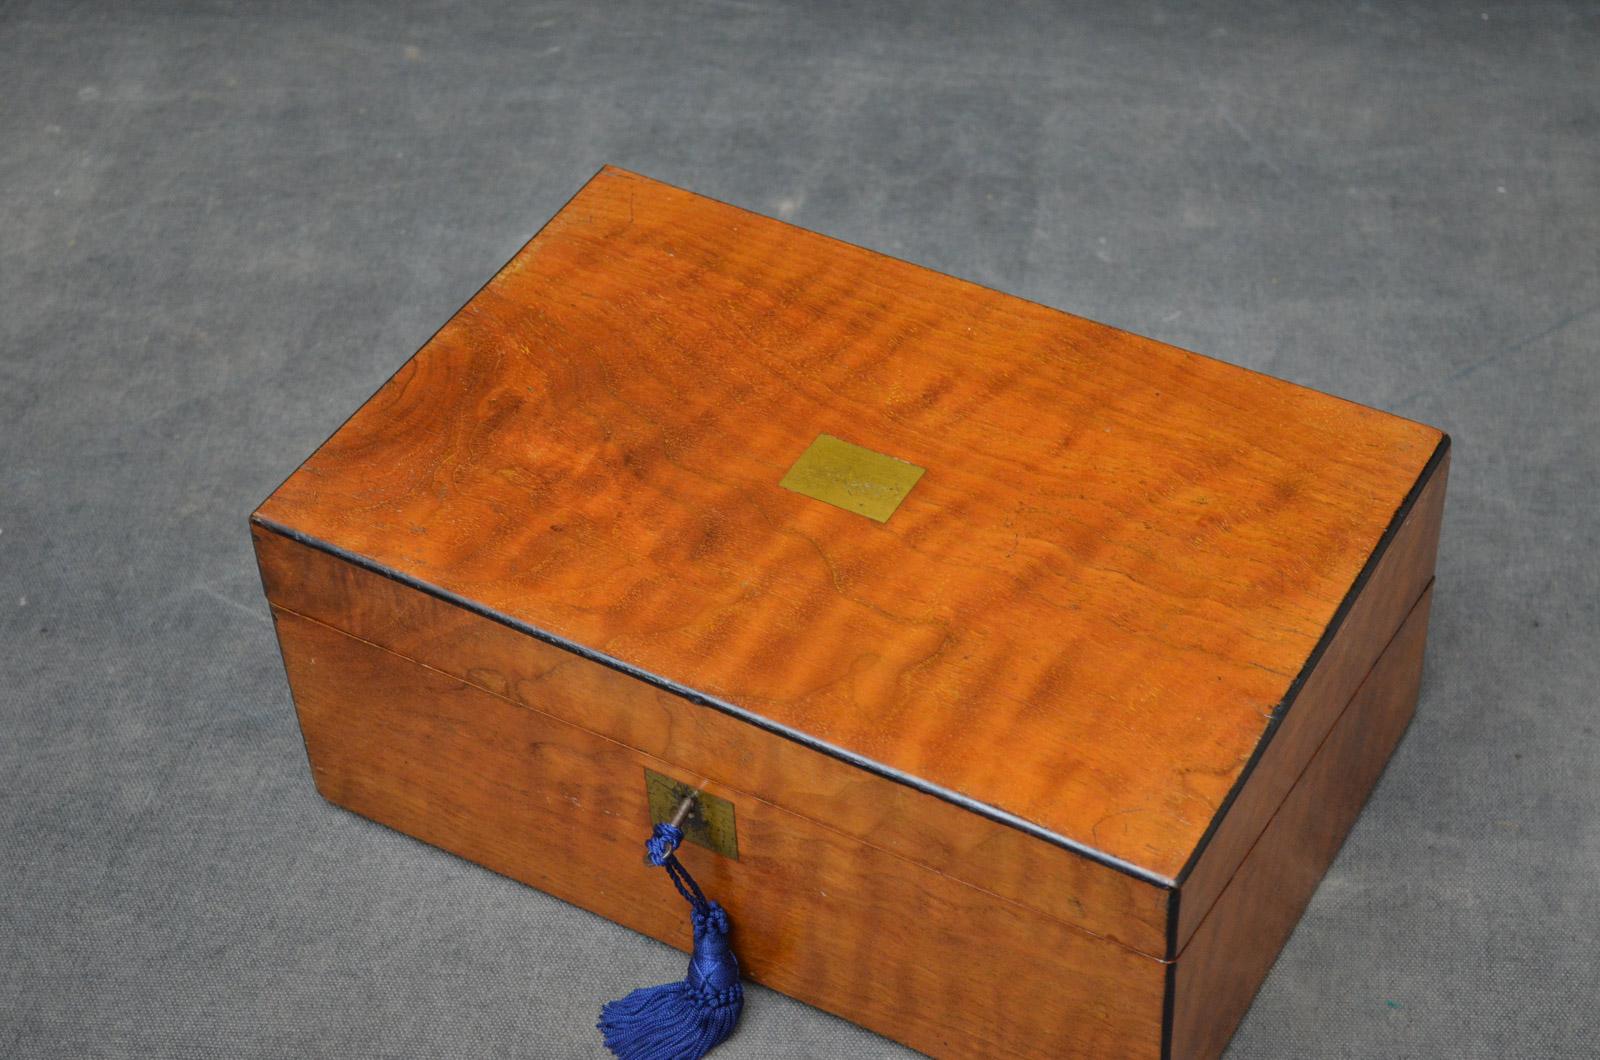 K0 Attractive Victorian figured walnut writing slope with lift up lid and leather writing surface, fitted with original working lock and a key.
This antique writing slope retains its original finish, mellow color and patina, all in home ready